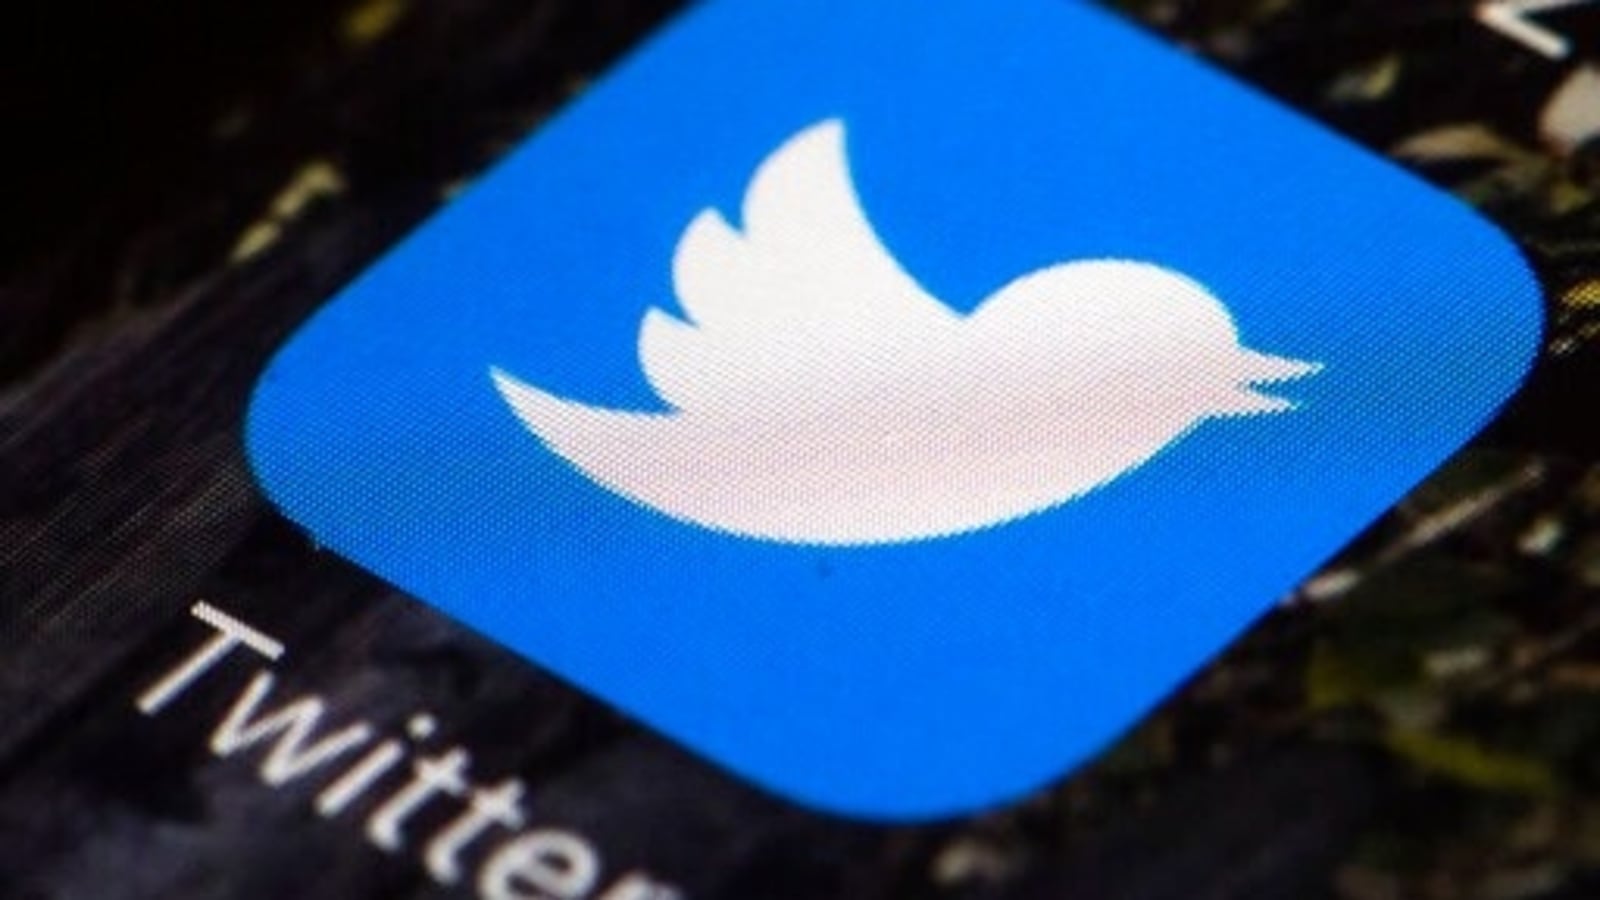 Russia won't block Twitter, but partial slowdown to continue